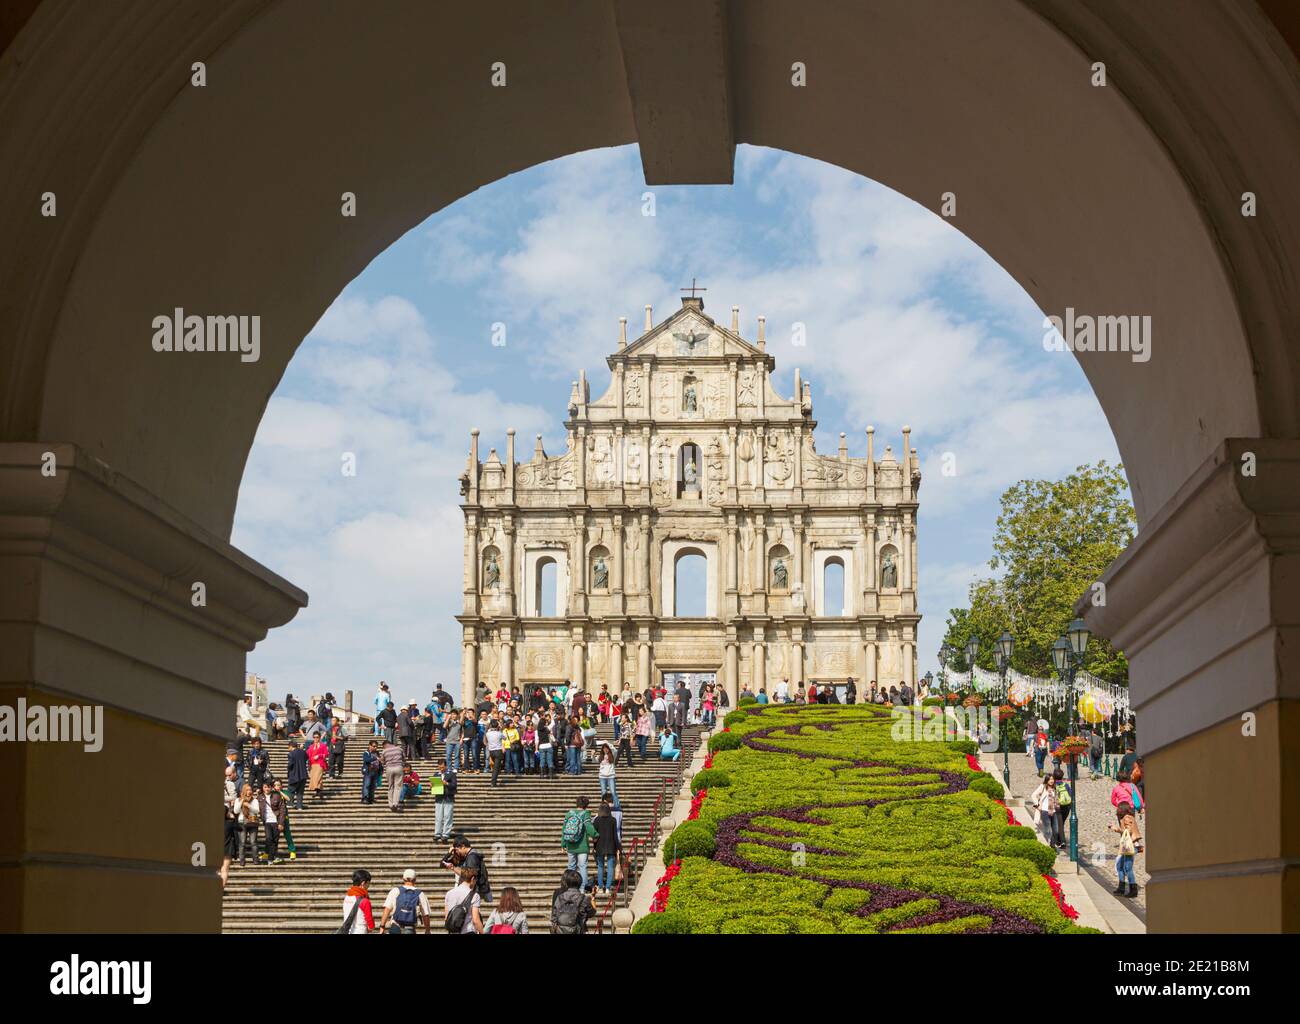 Macau, China.  Ruins of seventeenth century St. Paul's cathedral.  Ruinas do Sao Paulo.  Only the facade remains.  St. Paul's is part of the historic Stock Photo